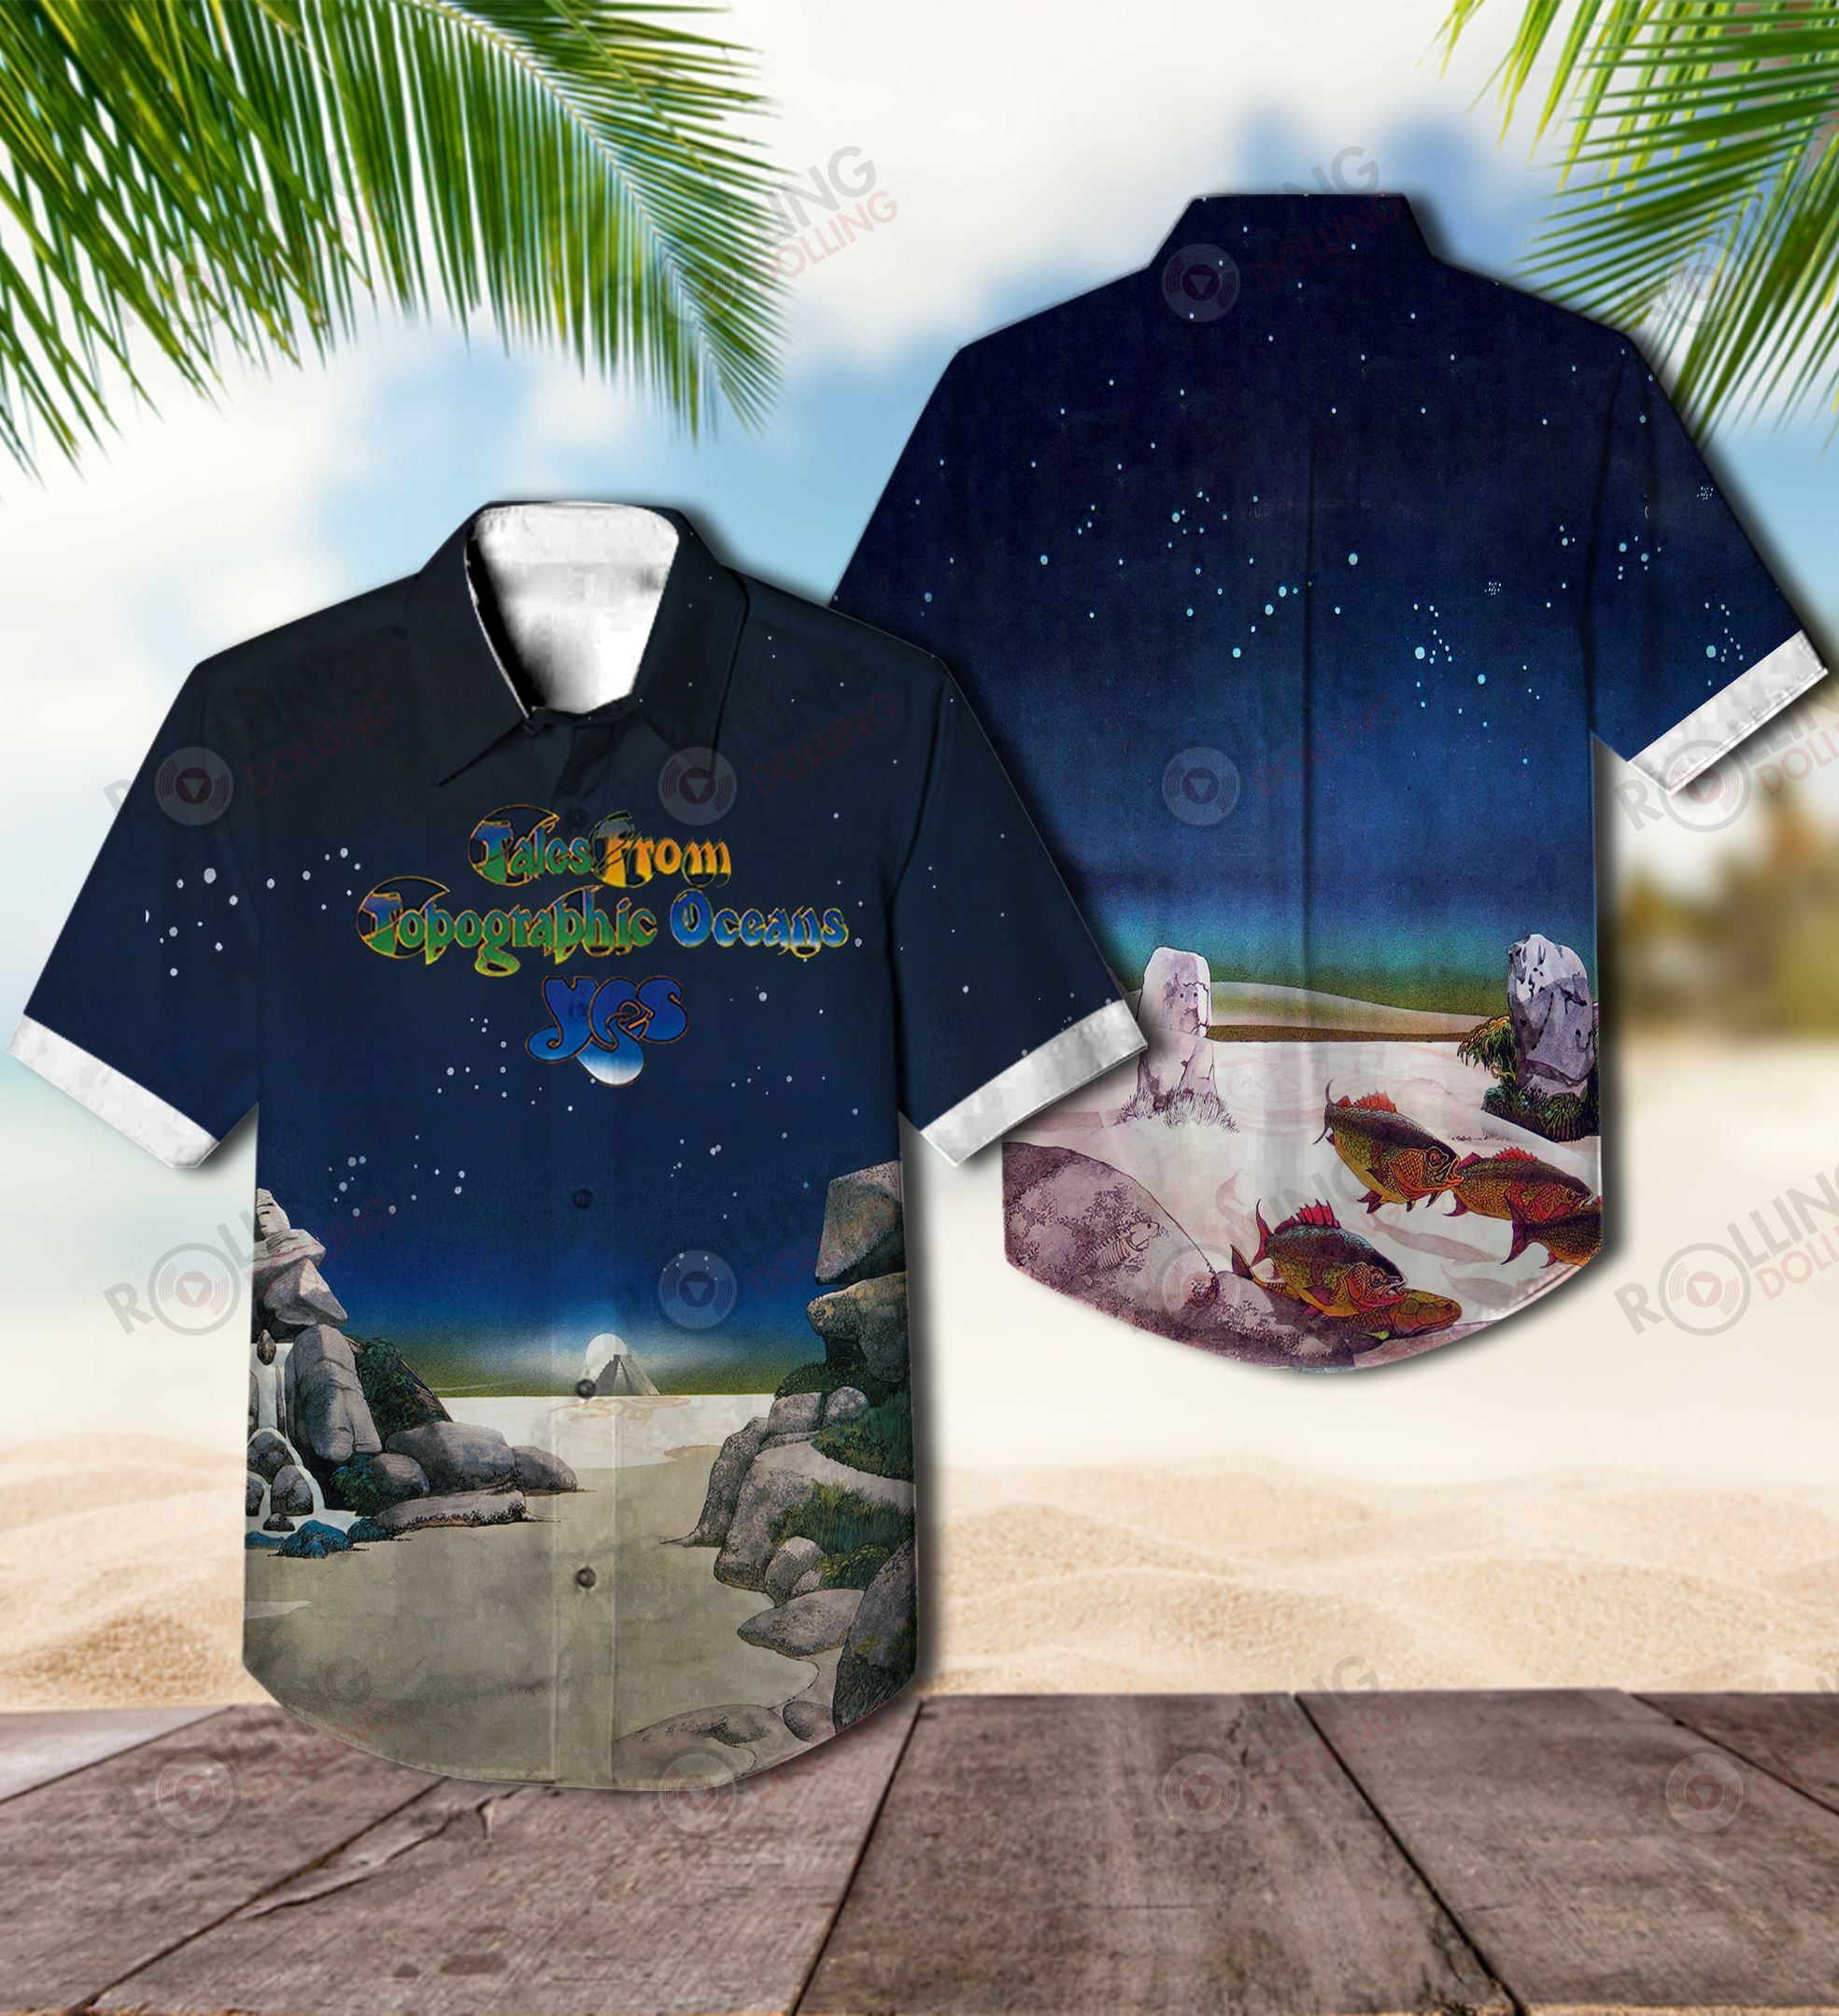 For summer, consider wearing This Amazing Hawaiian Shirt shirt in our store 174